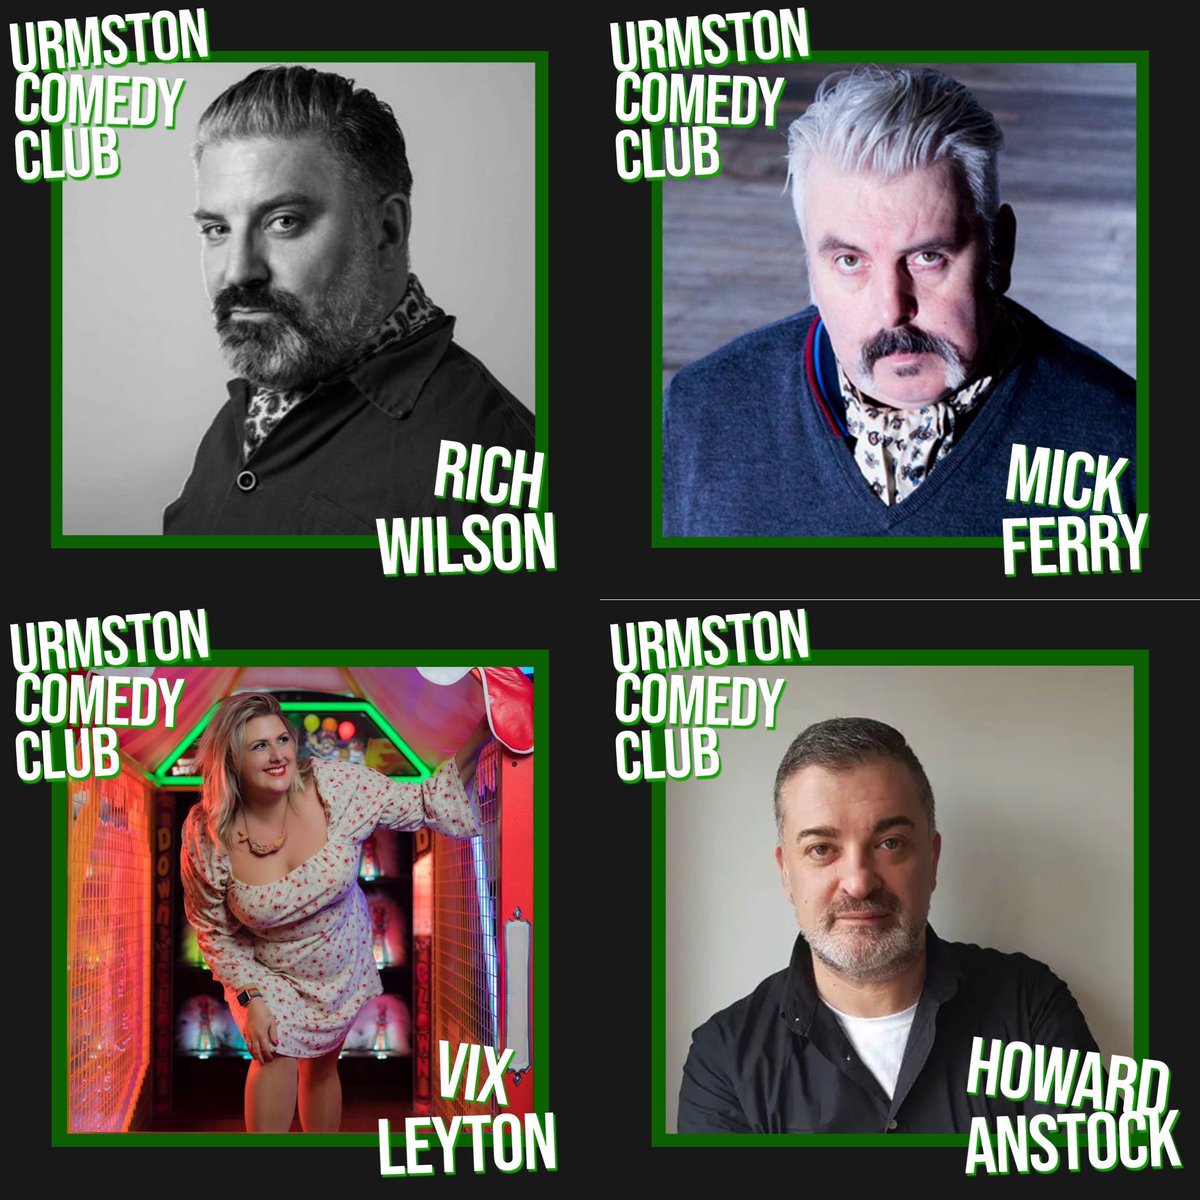 3rd September at @RoebuckUrmston on sale now. 
Featuring performances from @MickFerry @IamRichWilson @PRVix and @howard_anstock get your tickets now from @Shocal1 

#urmston #homeofcomedym41 #m41 #m41ers #mcr #manchester #manchestercomedy #trafford